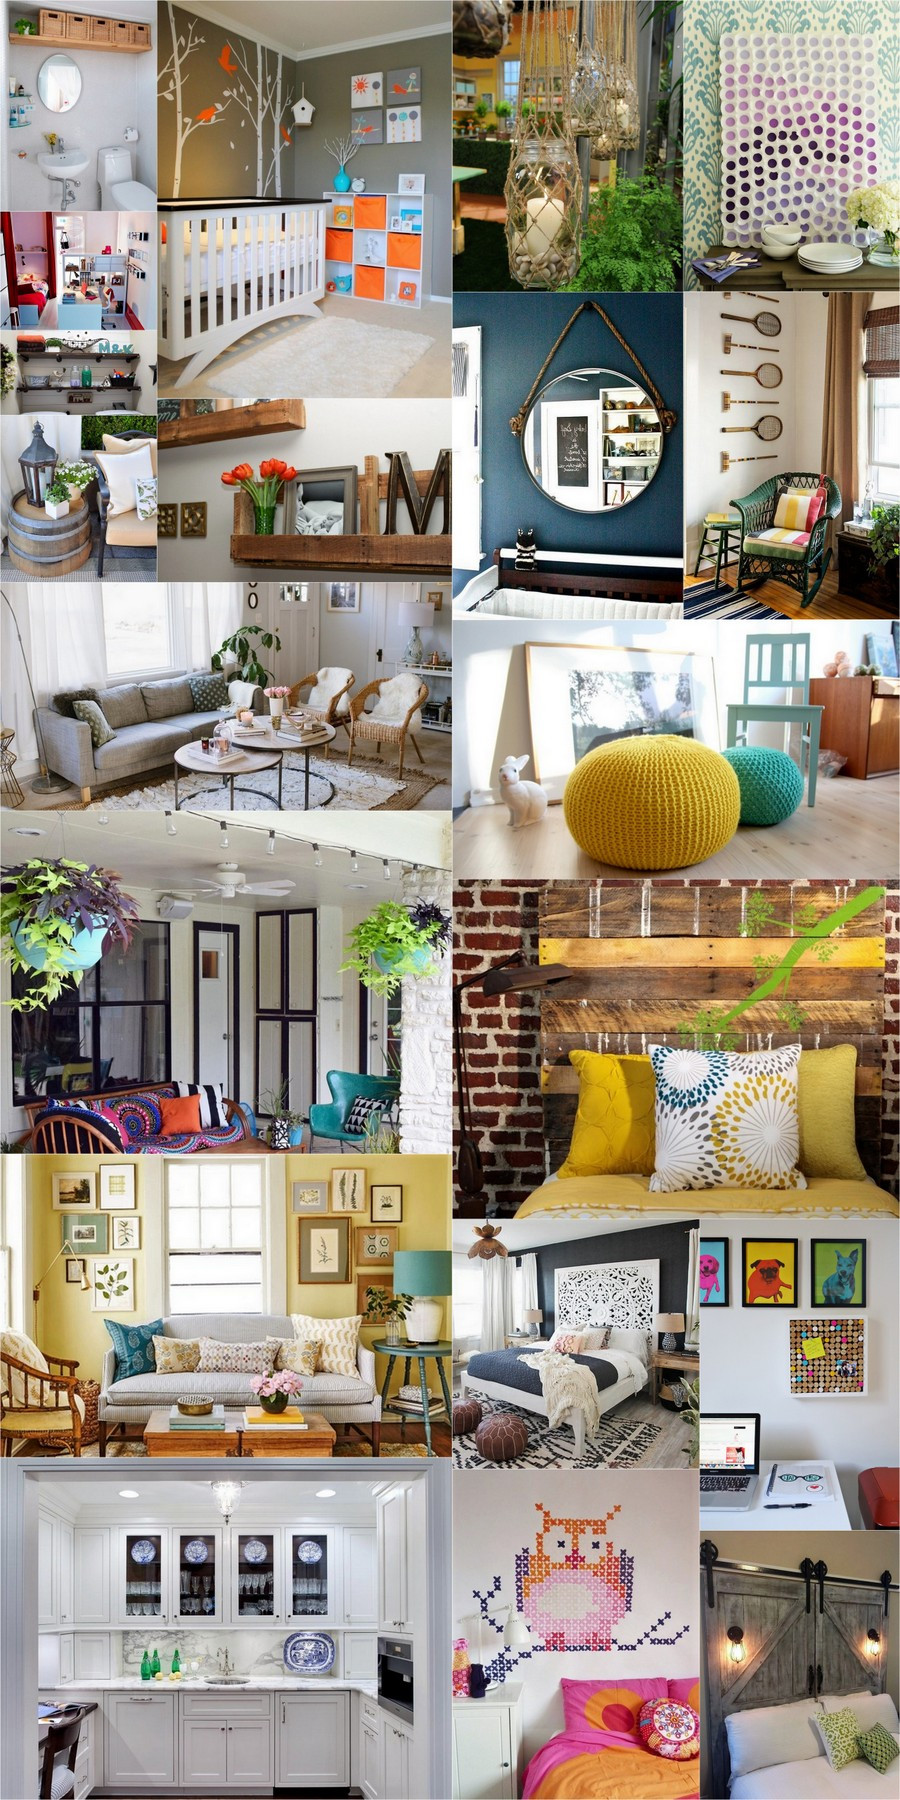 Creative Ideas For Home Decor
 Creative Home Decor Designs Projects and DIY Decorating